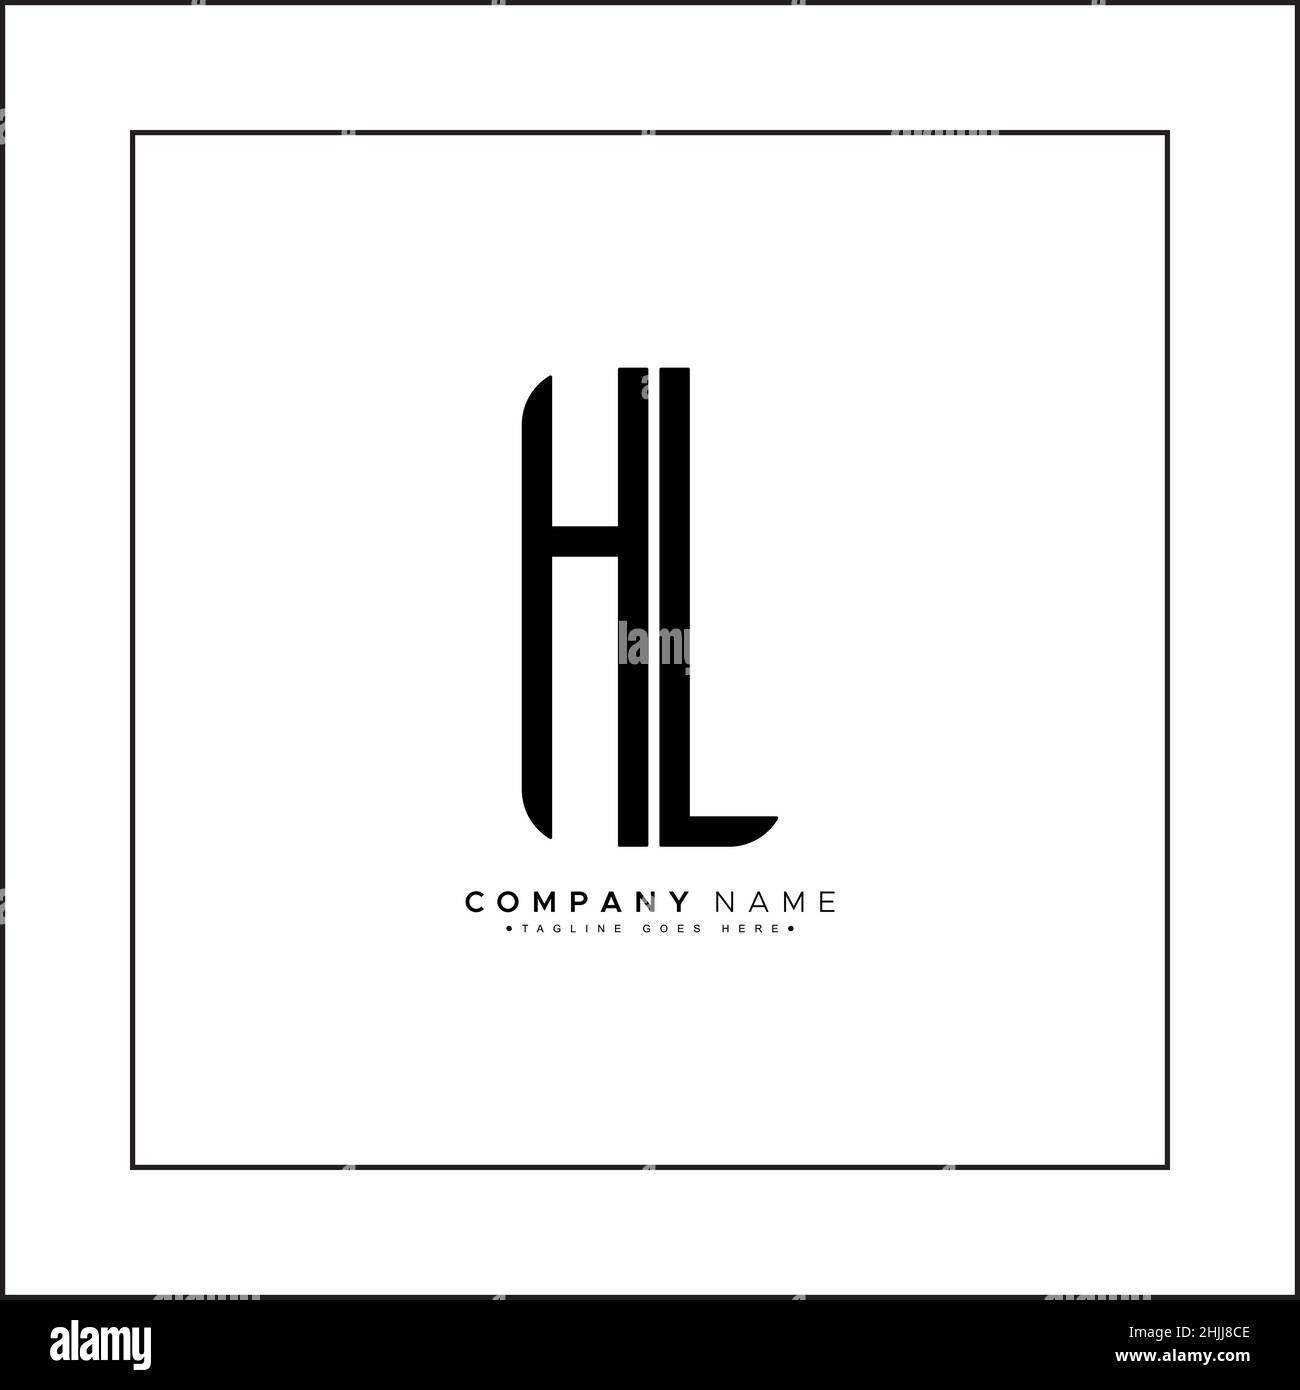 Initial Letter HL Logo - Simple Business Logo for Alphabet H and L Stock Vector